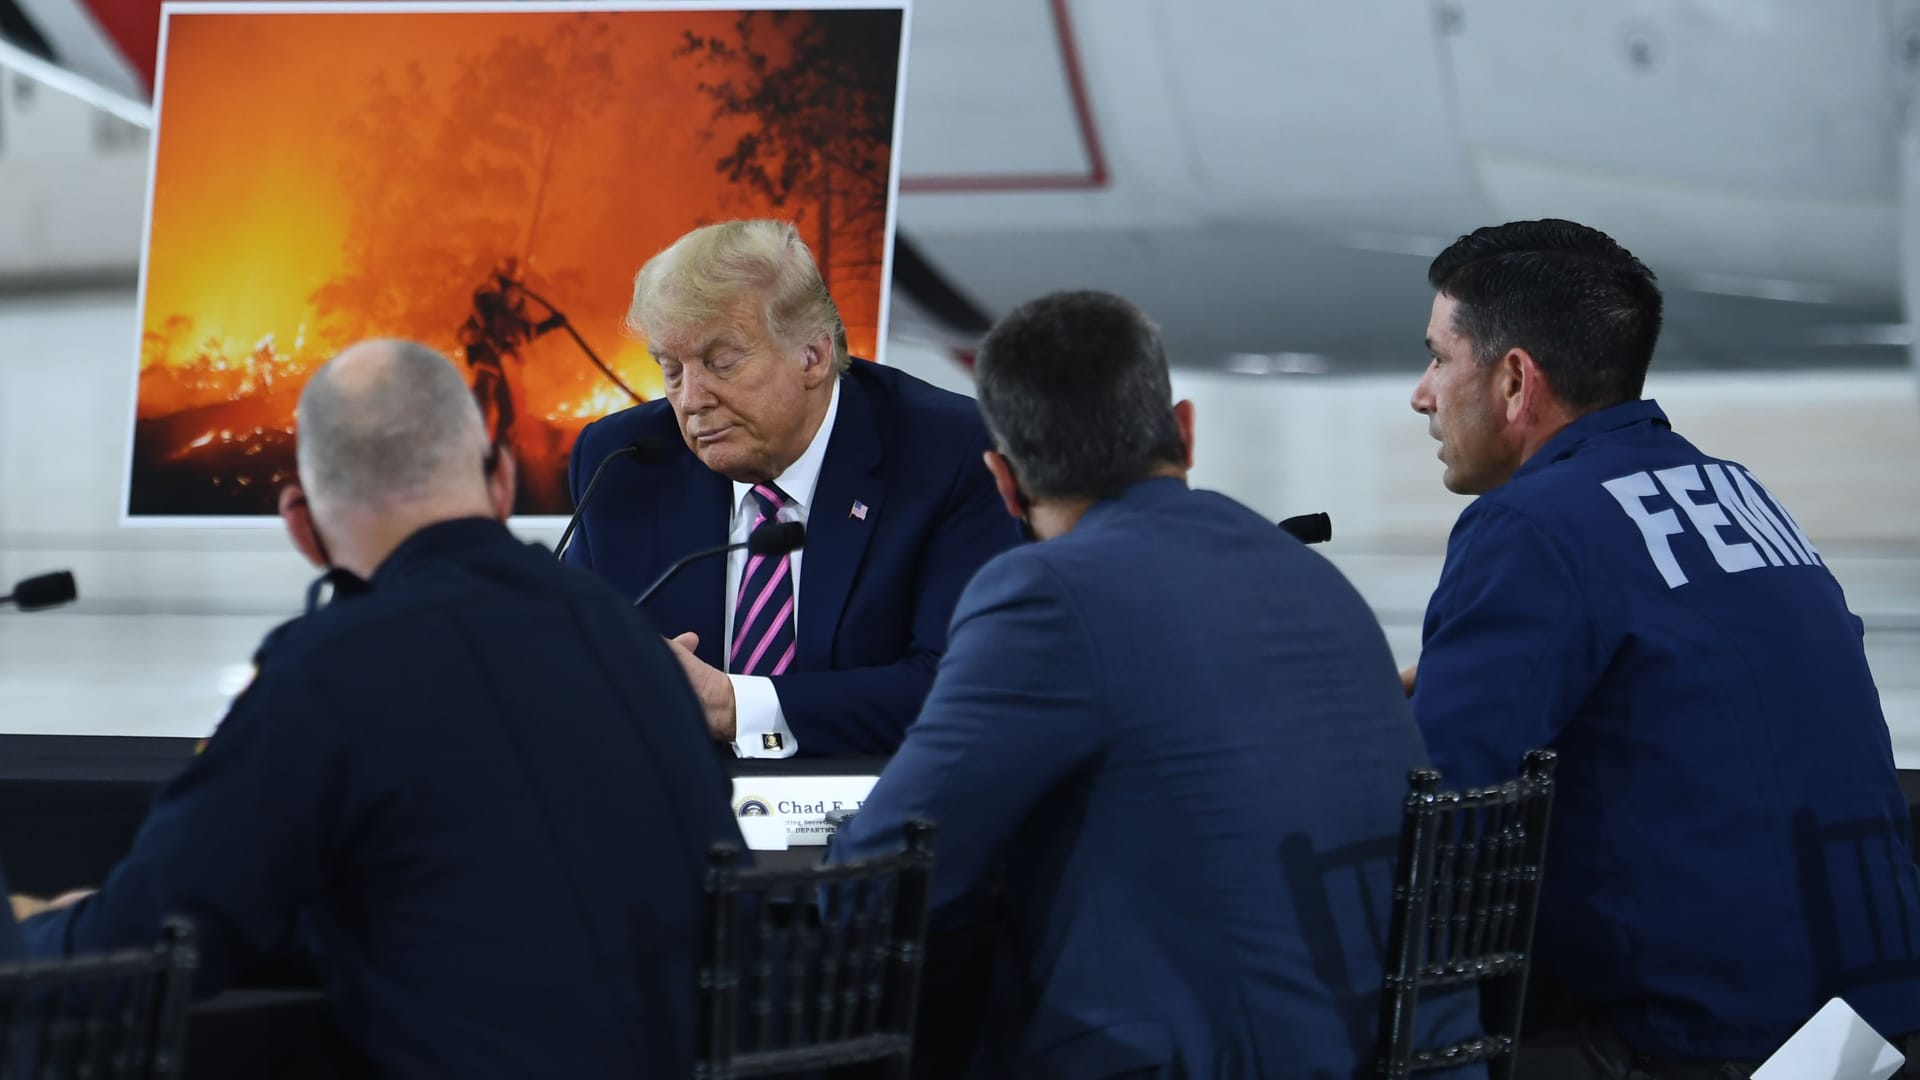 'I don't think science knows,' Trump responds when challenged on climate change at wildfire briefing